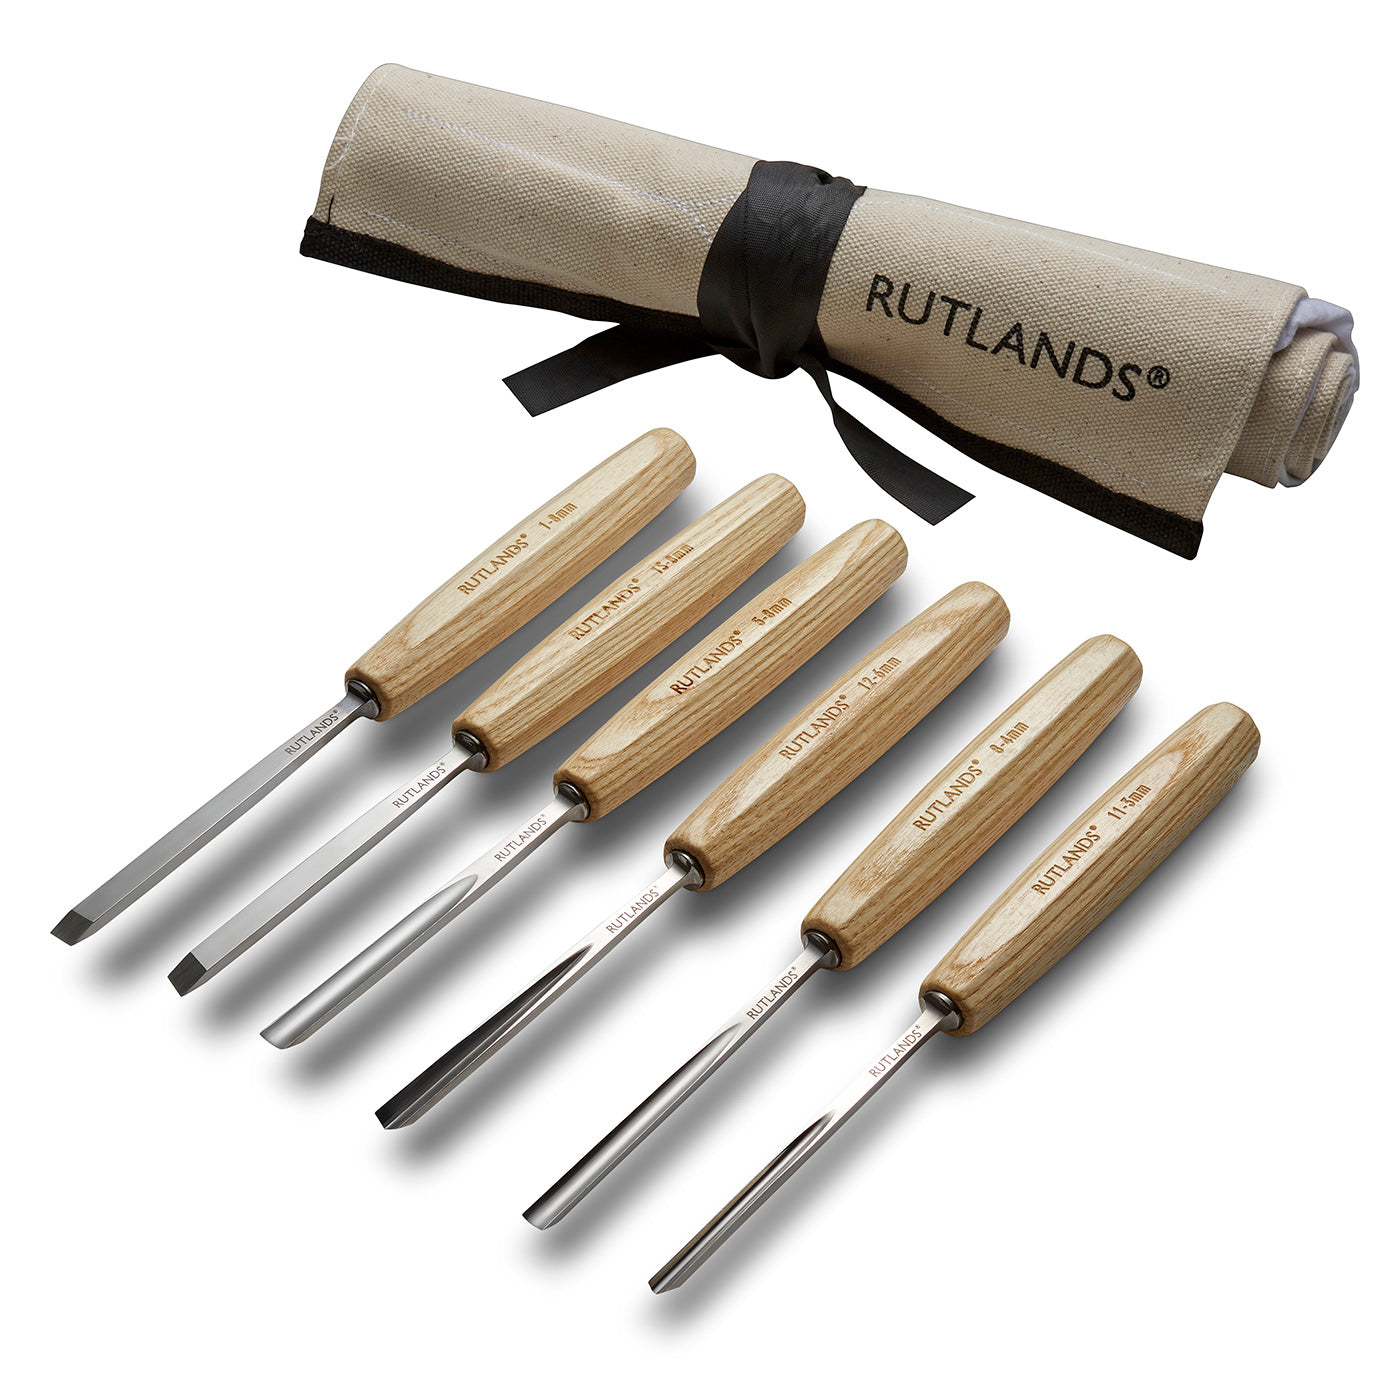 Carving Tools - Set of 6